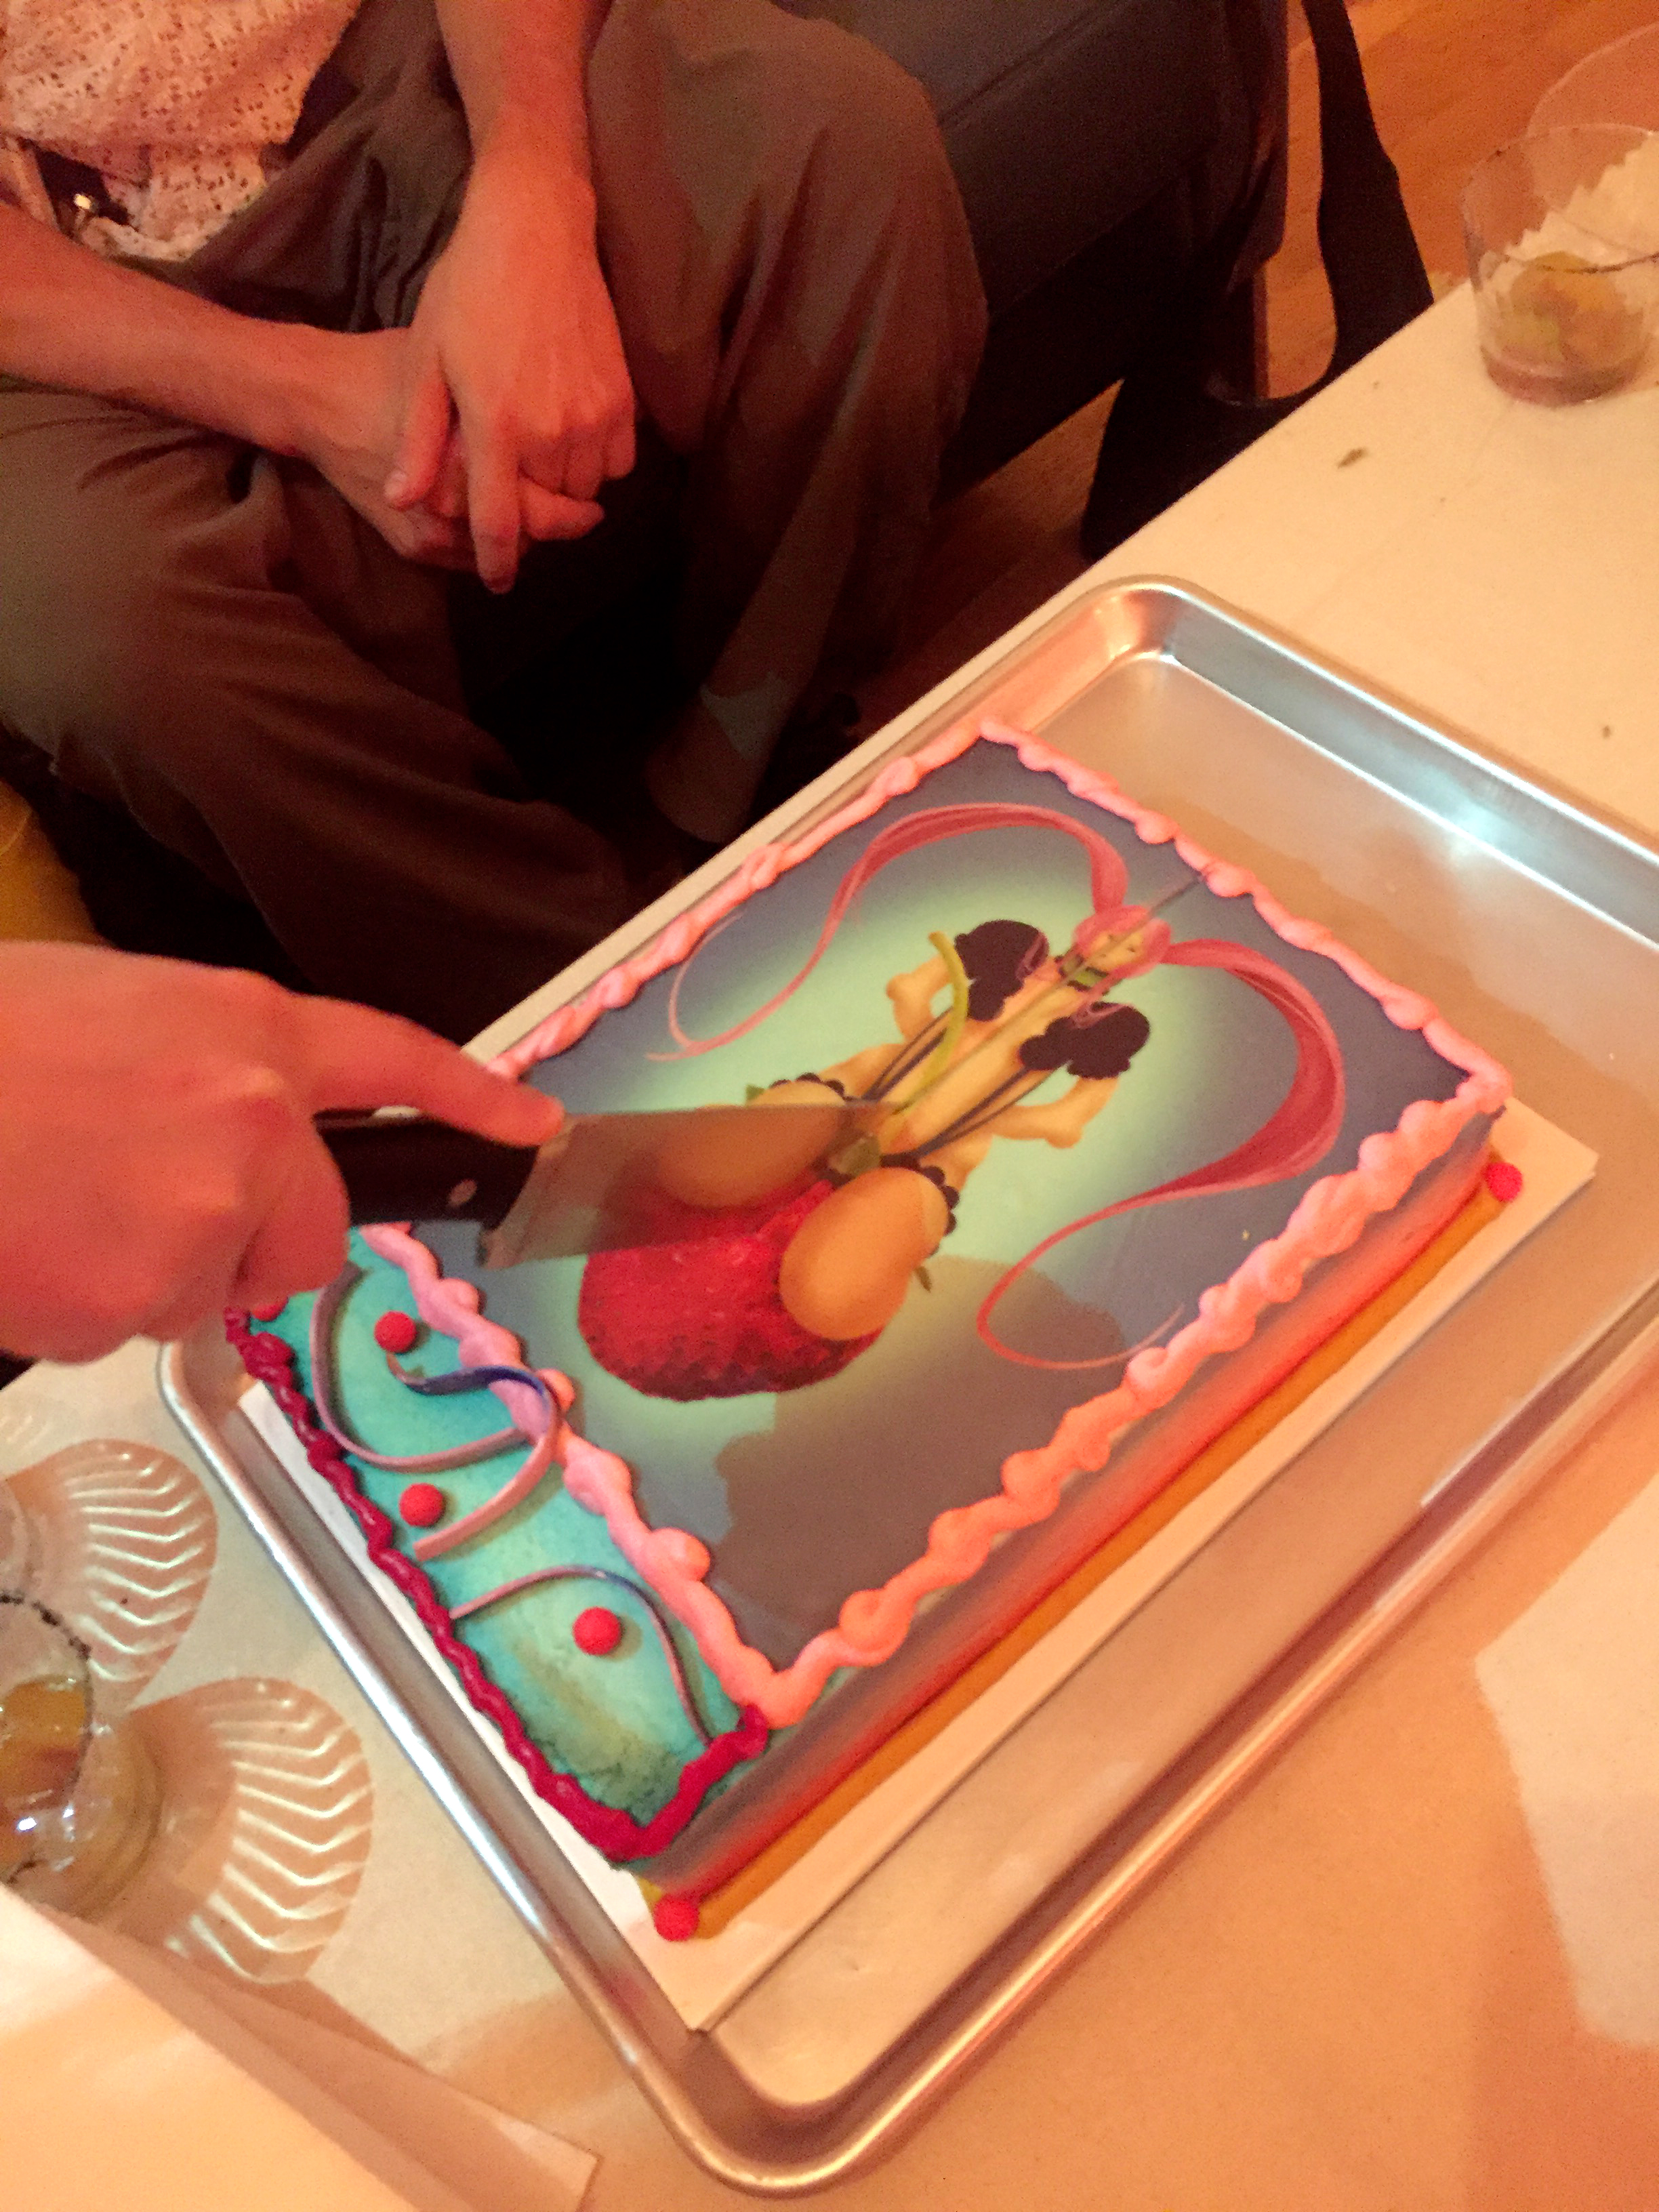 A knife cutting through a cake with an illustration of a girl on it atop a table